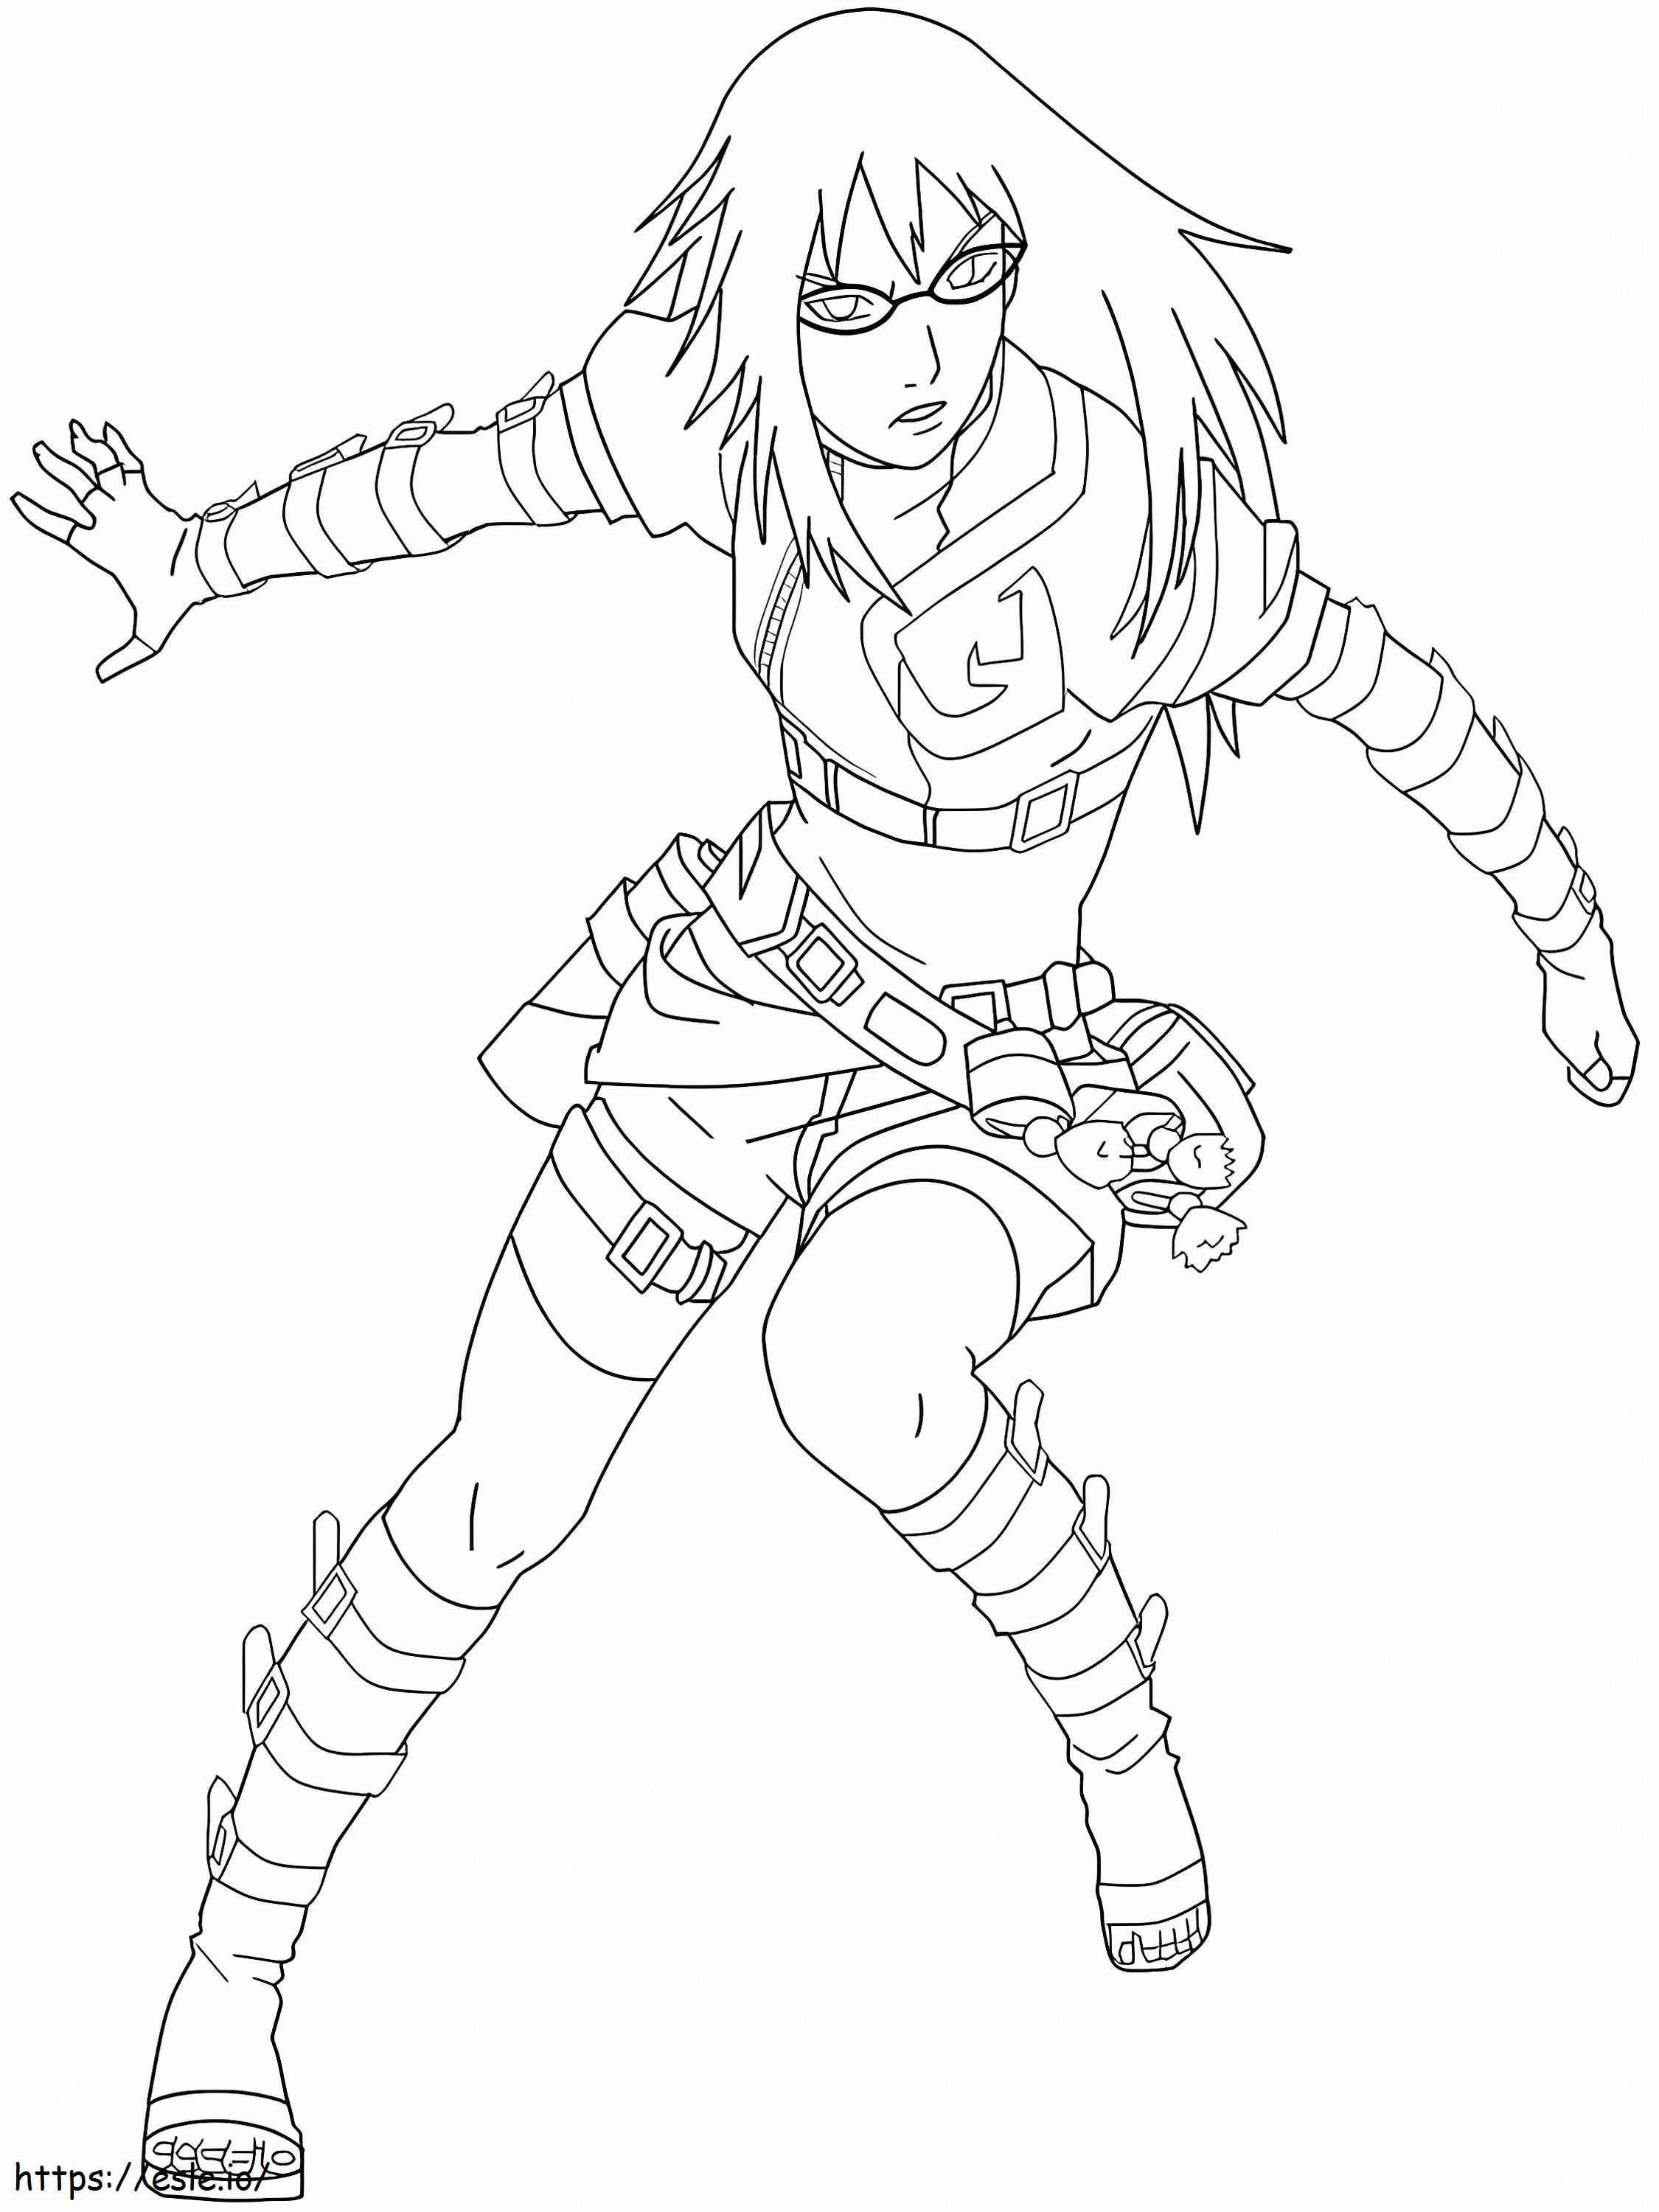 1561187618 Karin A4 coloring page